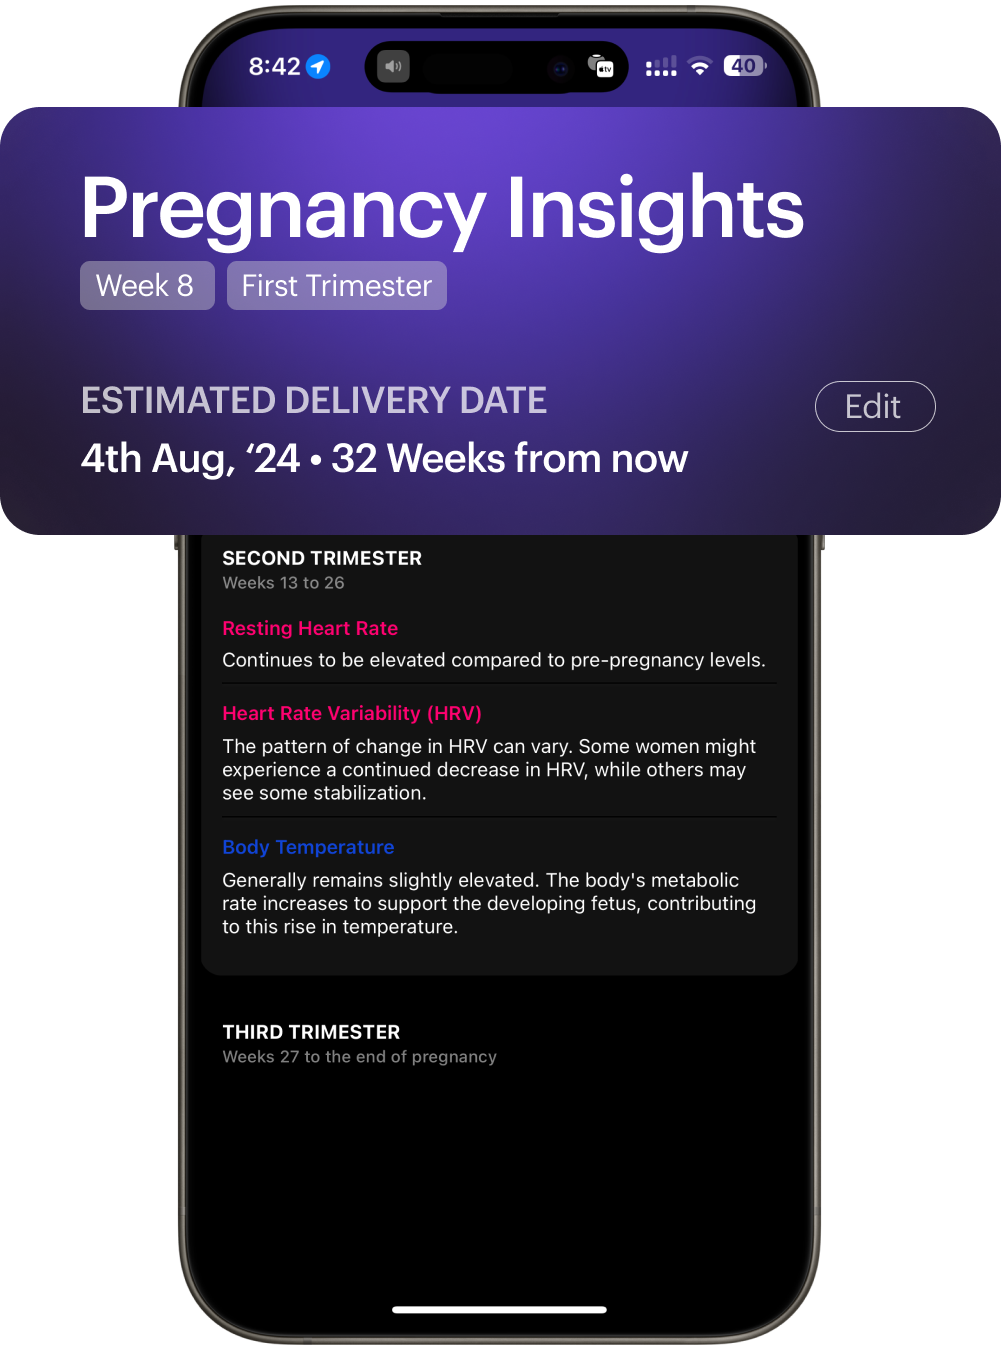 Pregnancy Insights in action on the Ultrahuman App